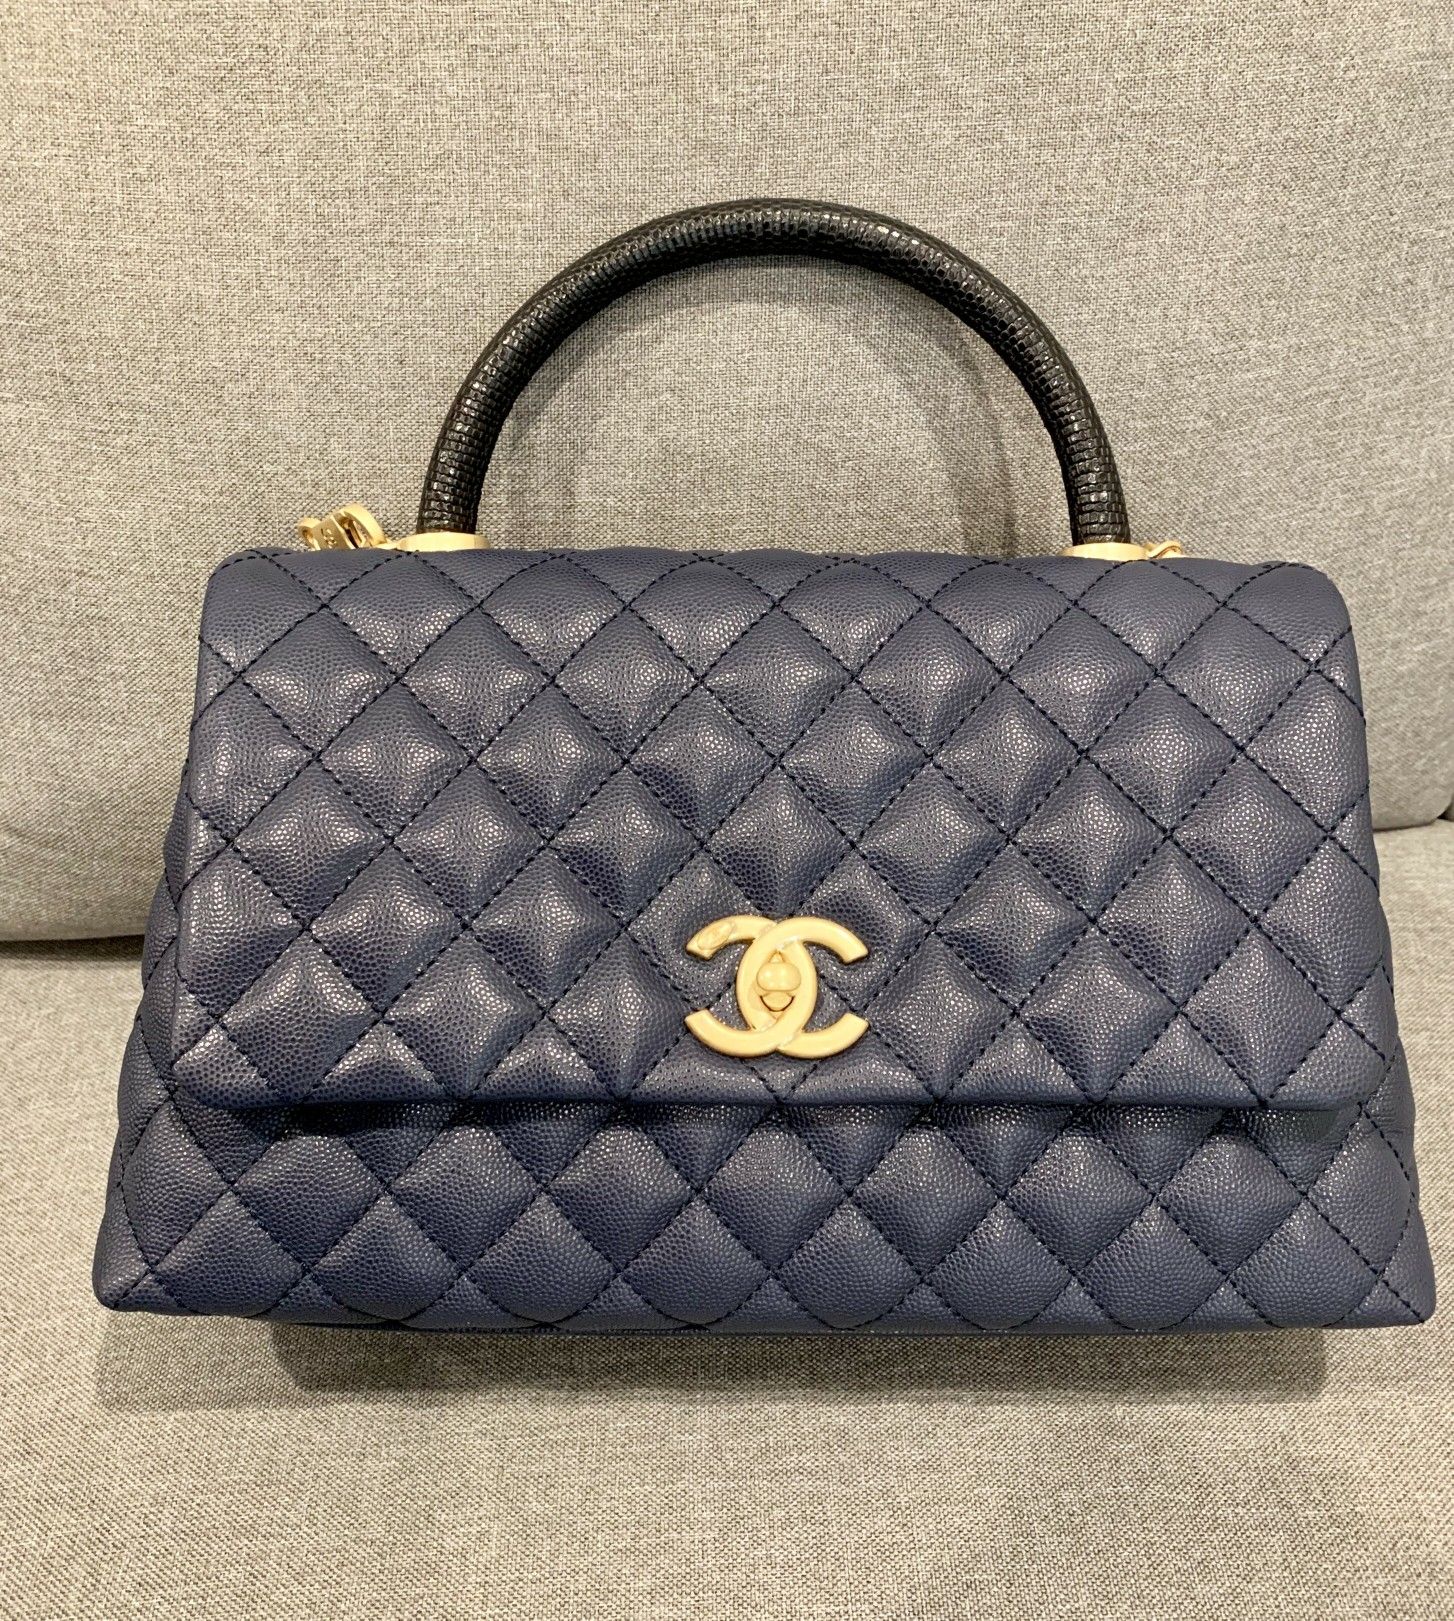 Authentic Chanel Flap Bag With Top Handle